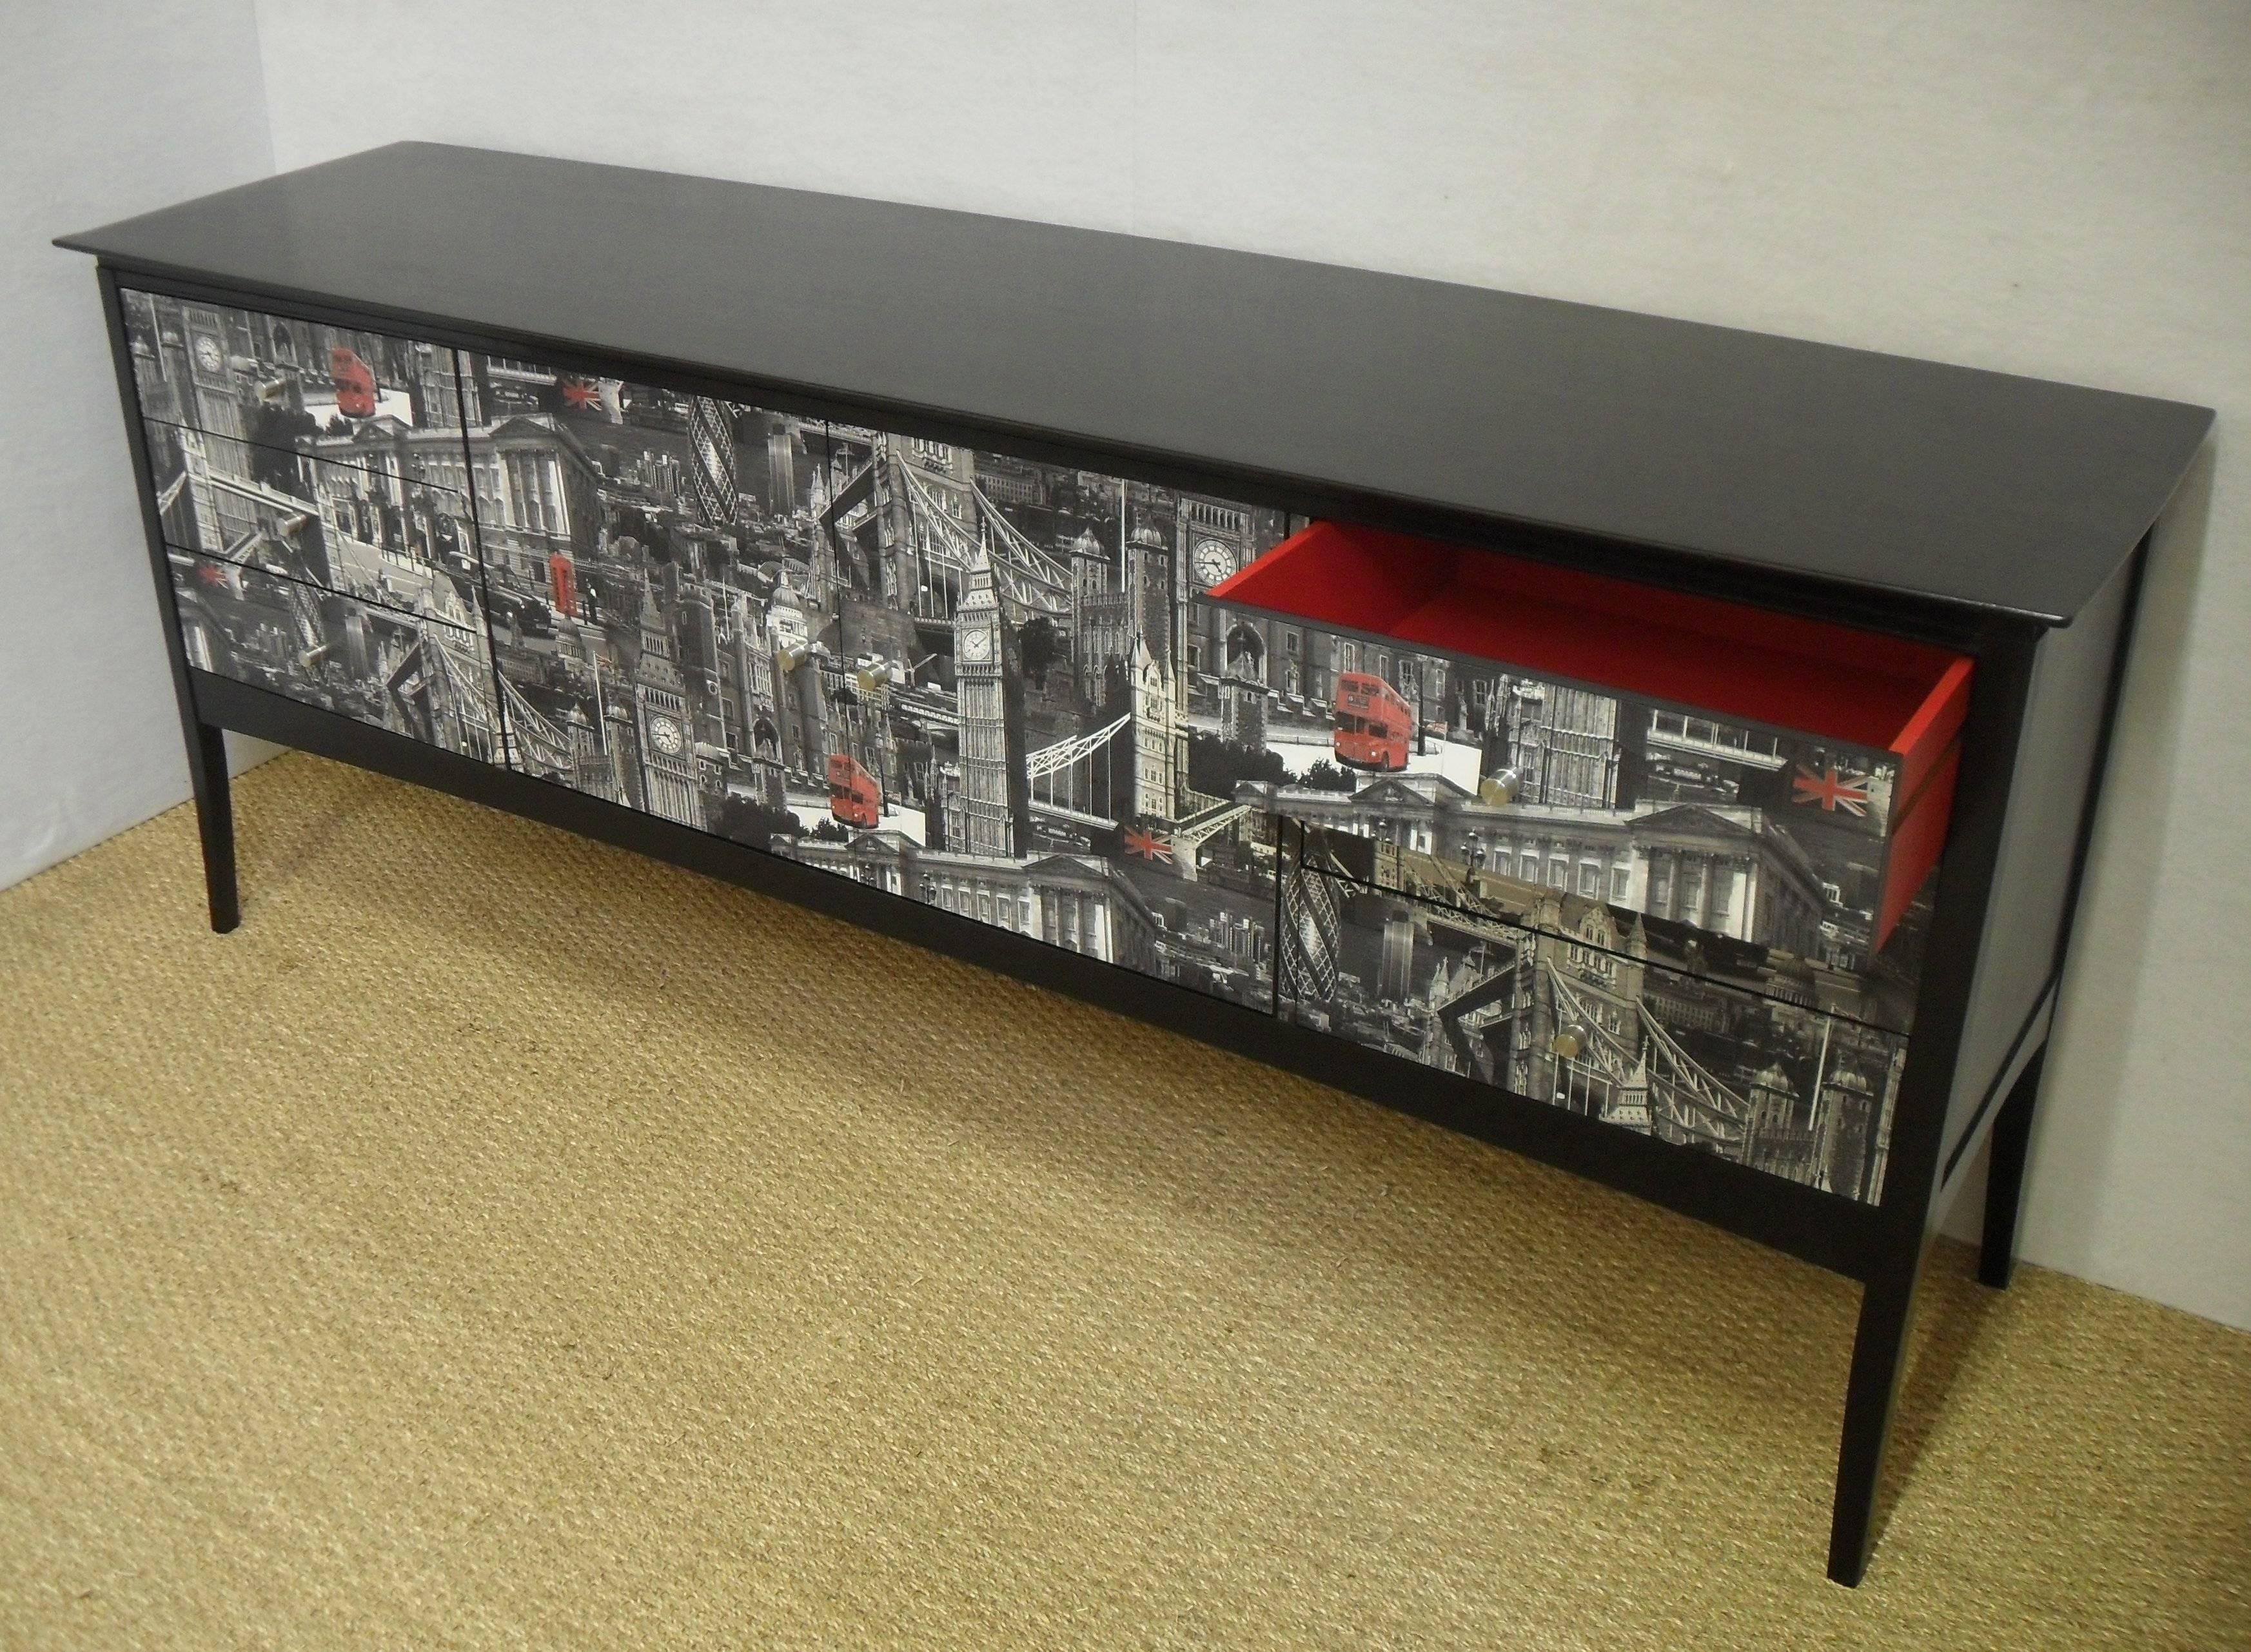 A stylish, 1970s upcycled sideboard based on the theme 'London'. The drawers and cupboard doors have all the famous London landmarks running through including, Buckingham Palace, Big Ben and Tower Bridge. Inside, the drawers and cupboard are painted